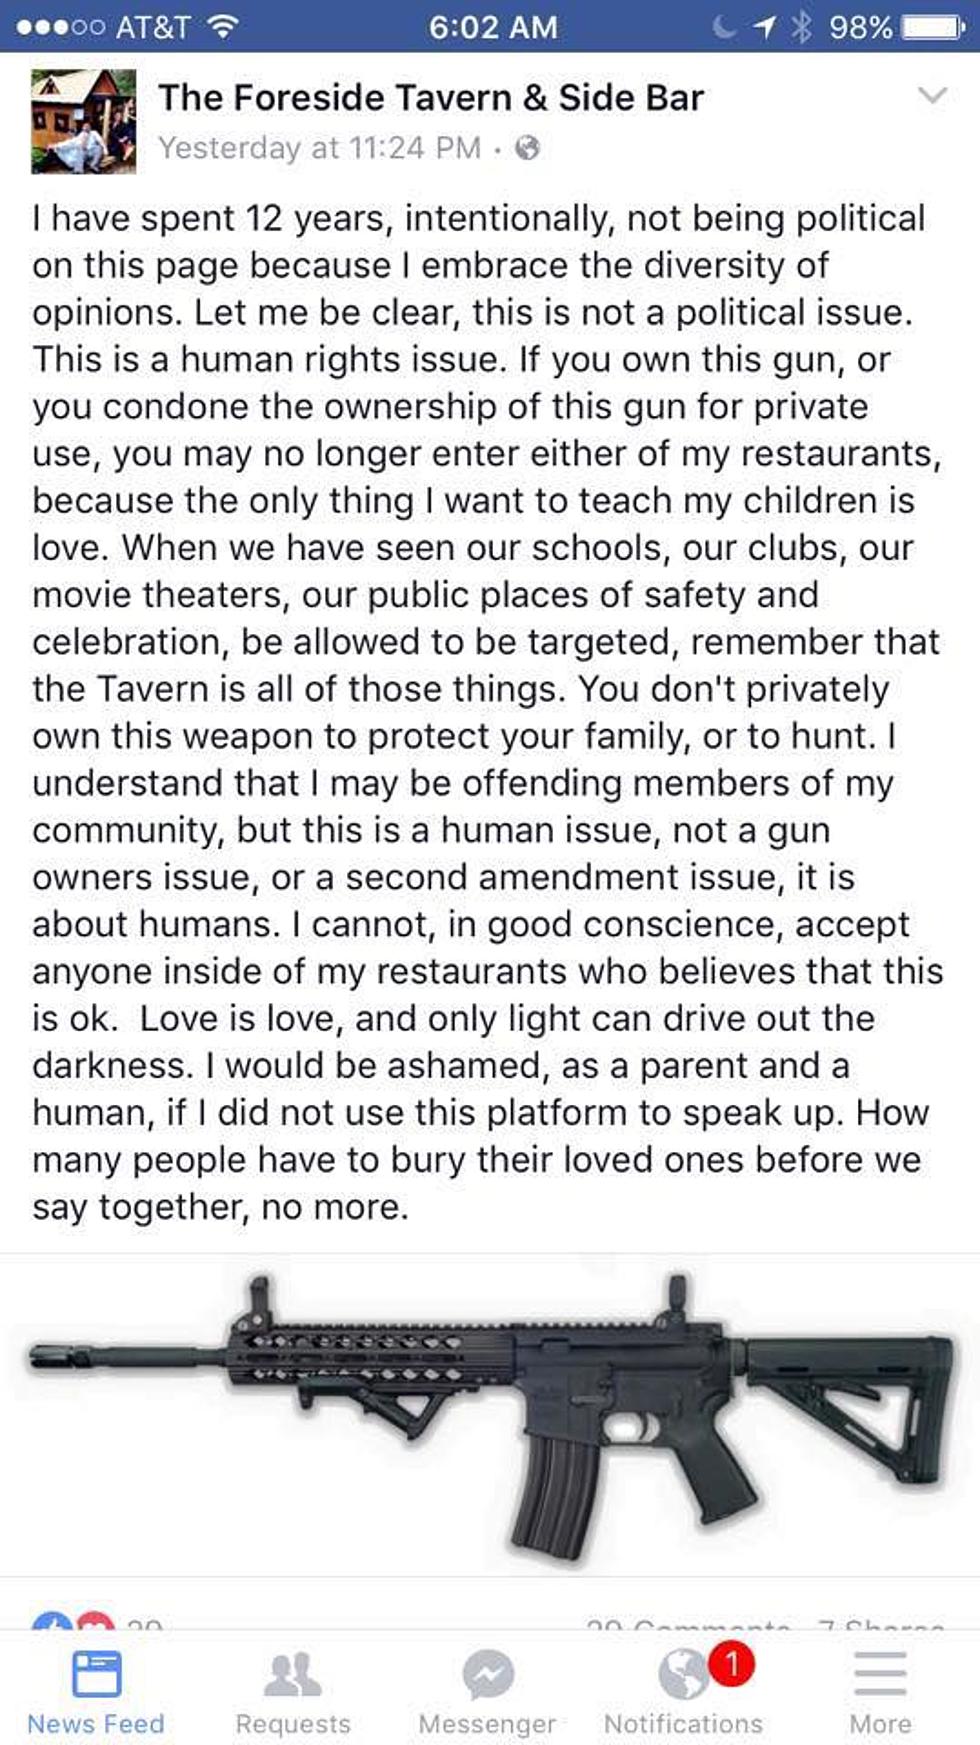 Owner Of ‘Grace’ Portland And ‘Foreside Tavern’ Falmouth Is Banning Customers Who Condone Or Own Certain Guns